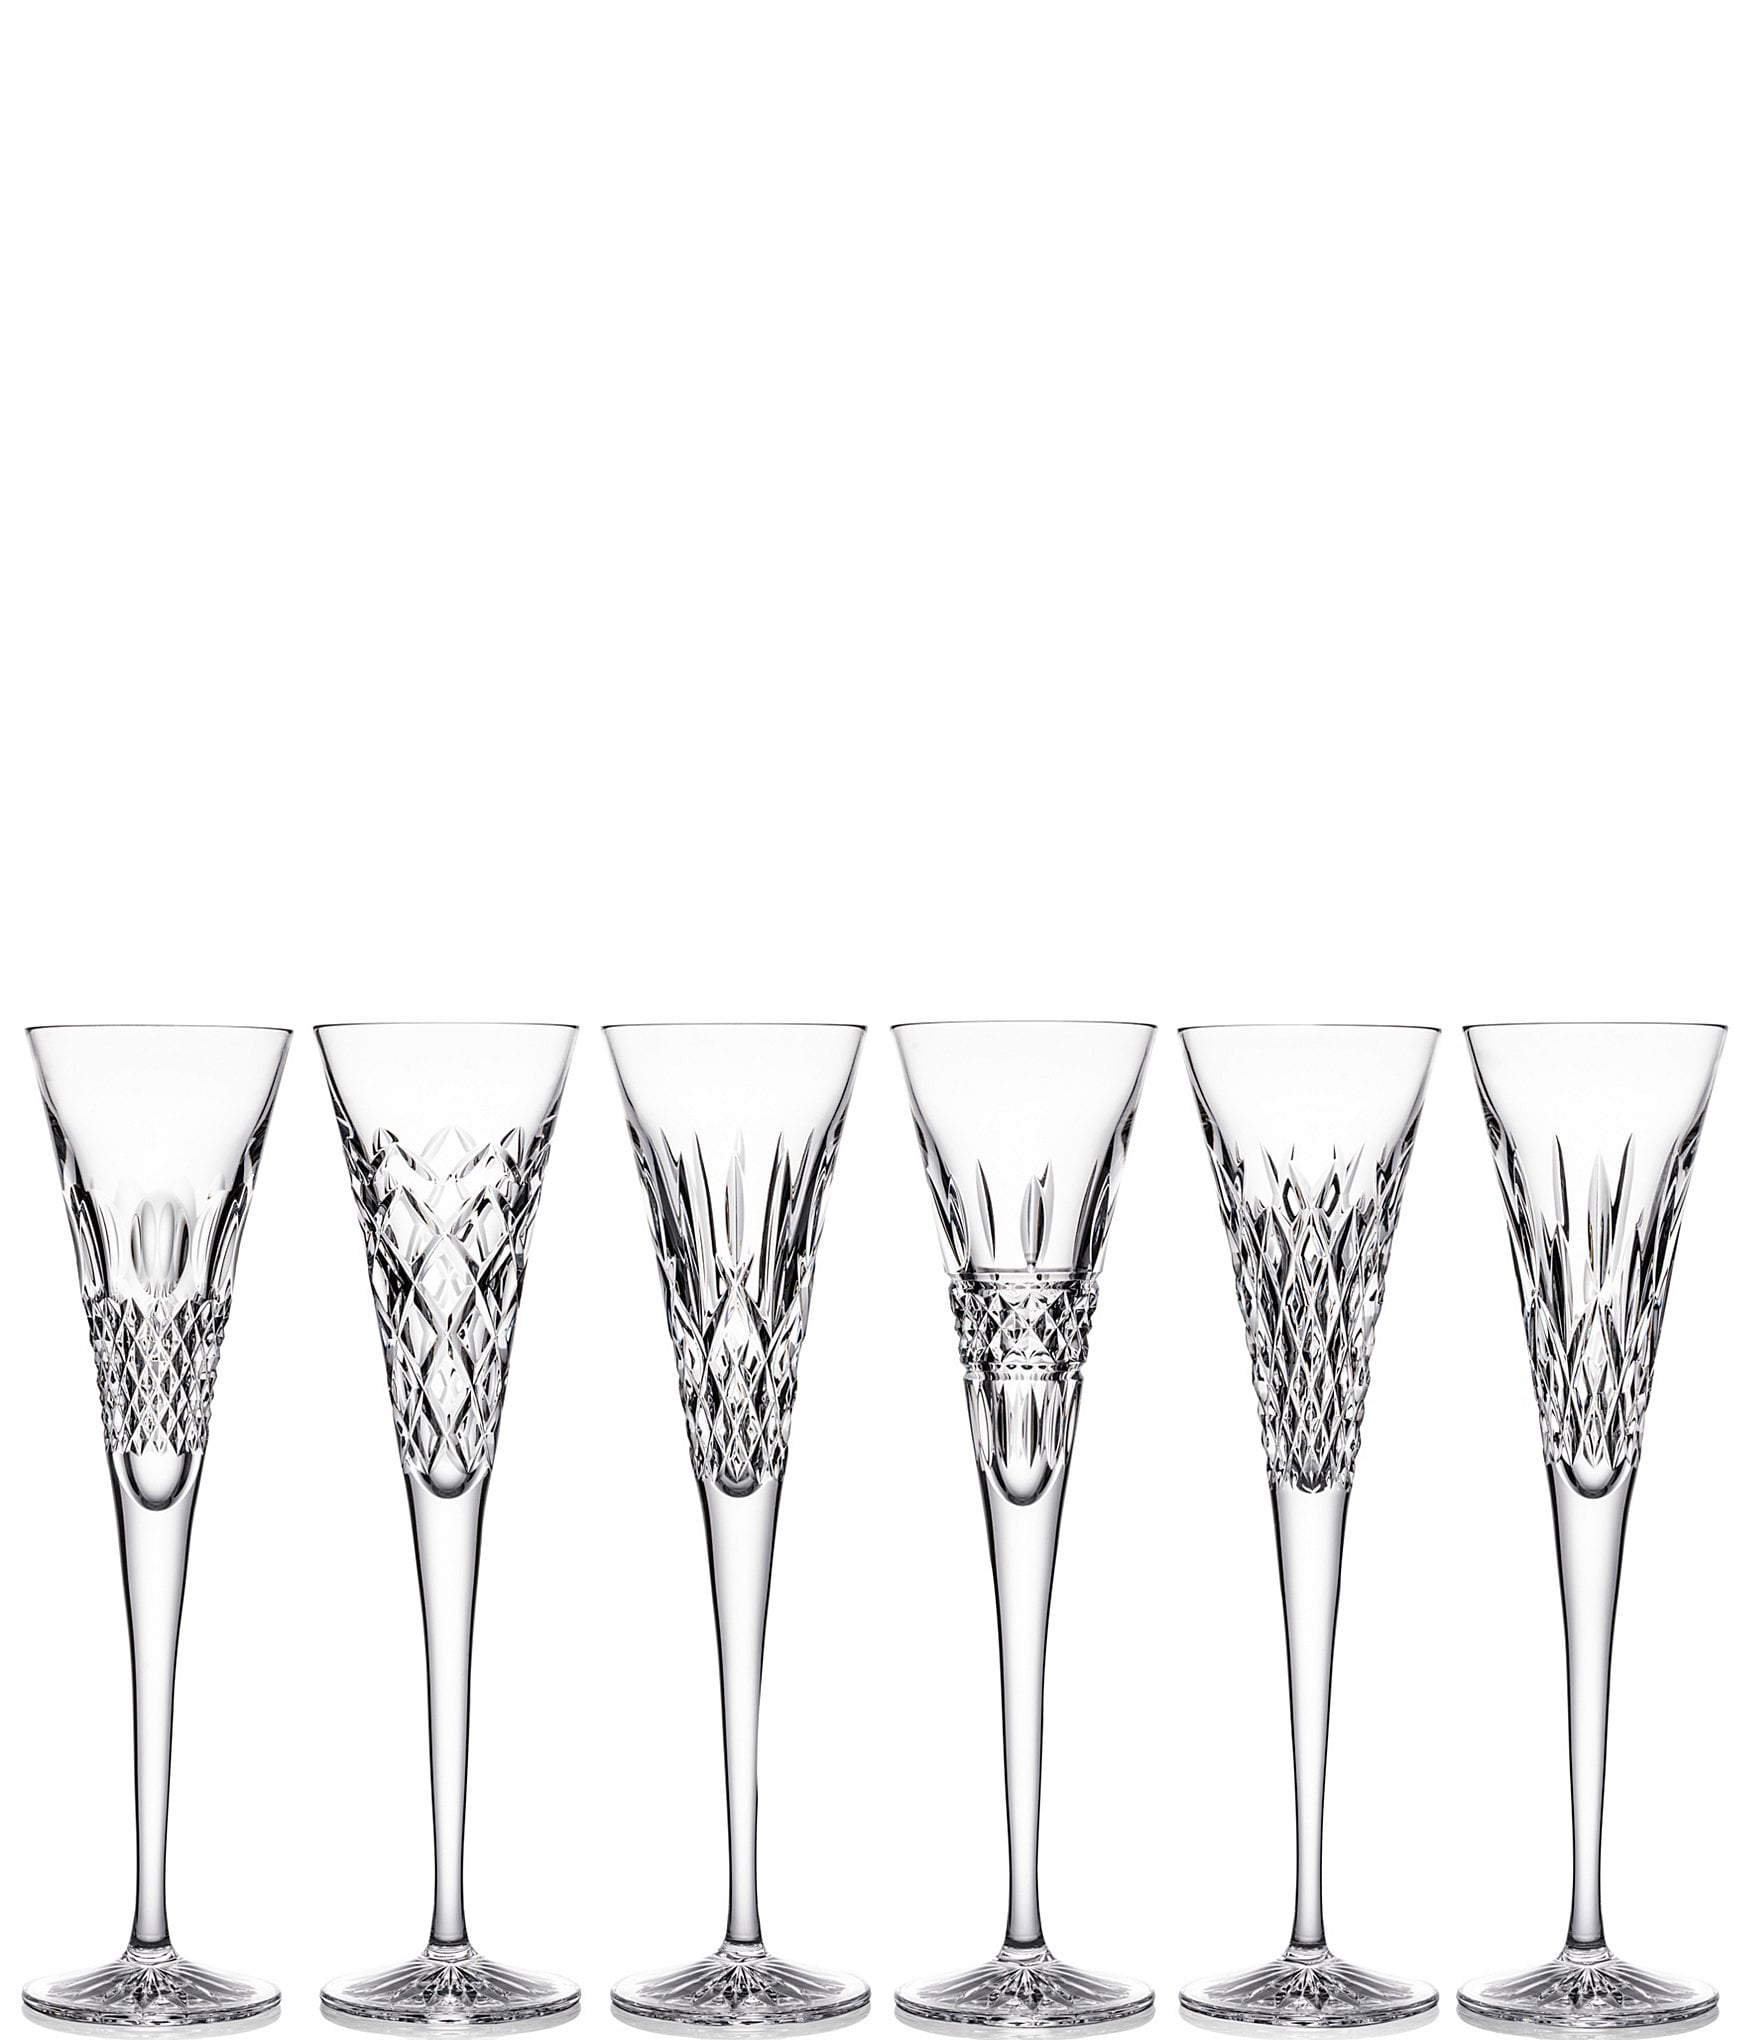 Champagne Flutes (Set Of 2)，Tall, Long Stem, Elegant and Delicate